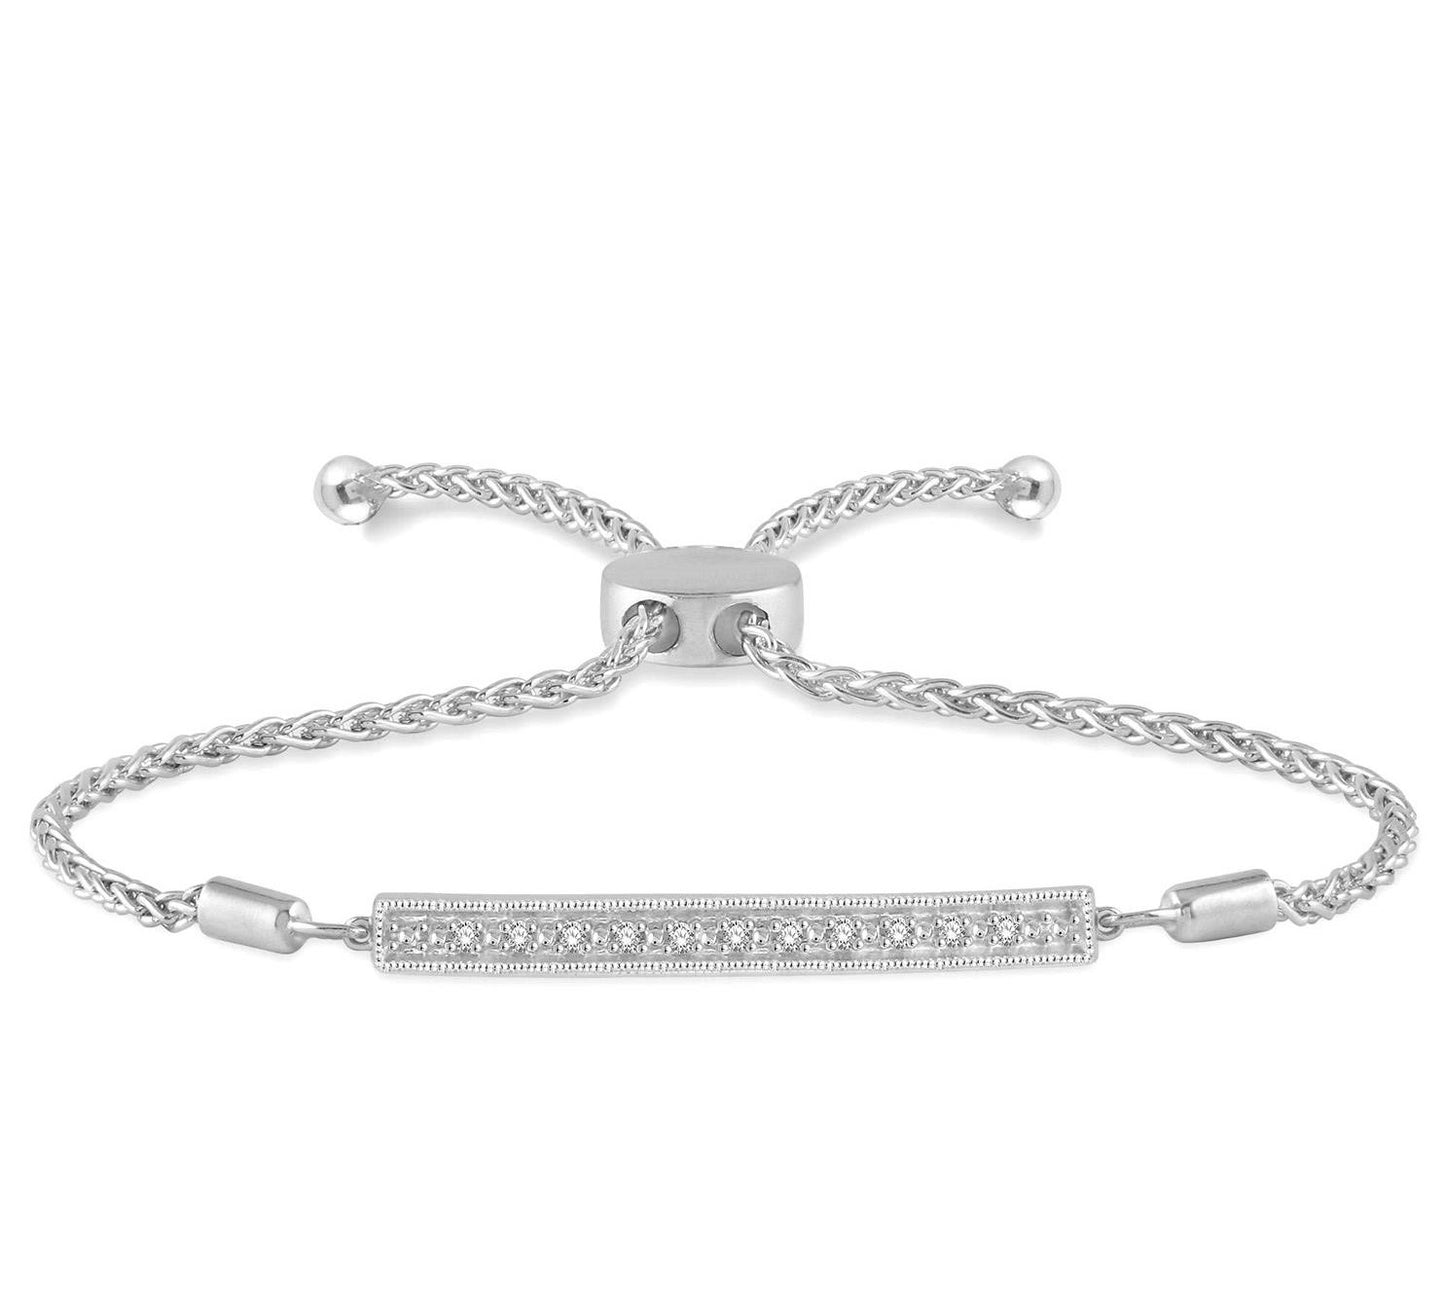 Adjustable Bolo Clasp Bracelet with Diamonds in Sterling Silver